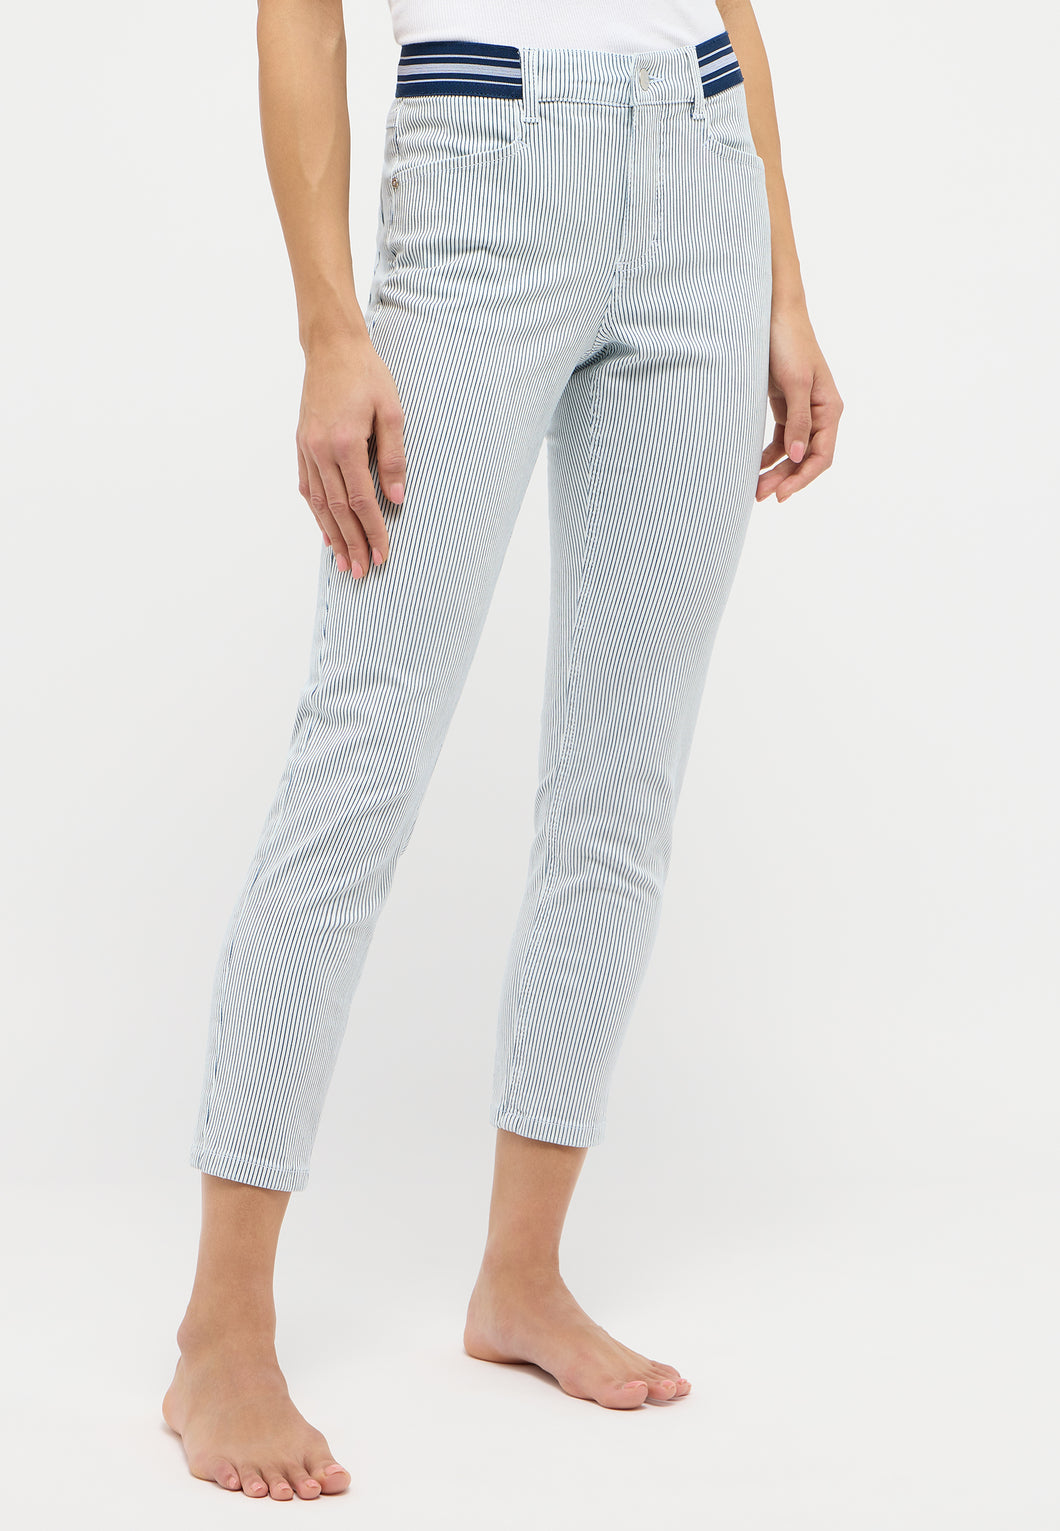 ANGELS ORNELLA SPORTY JEANS light blue used